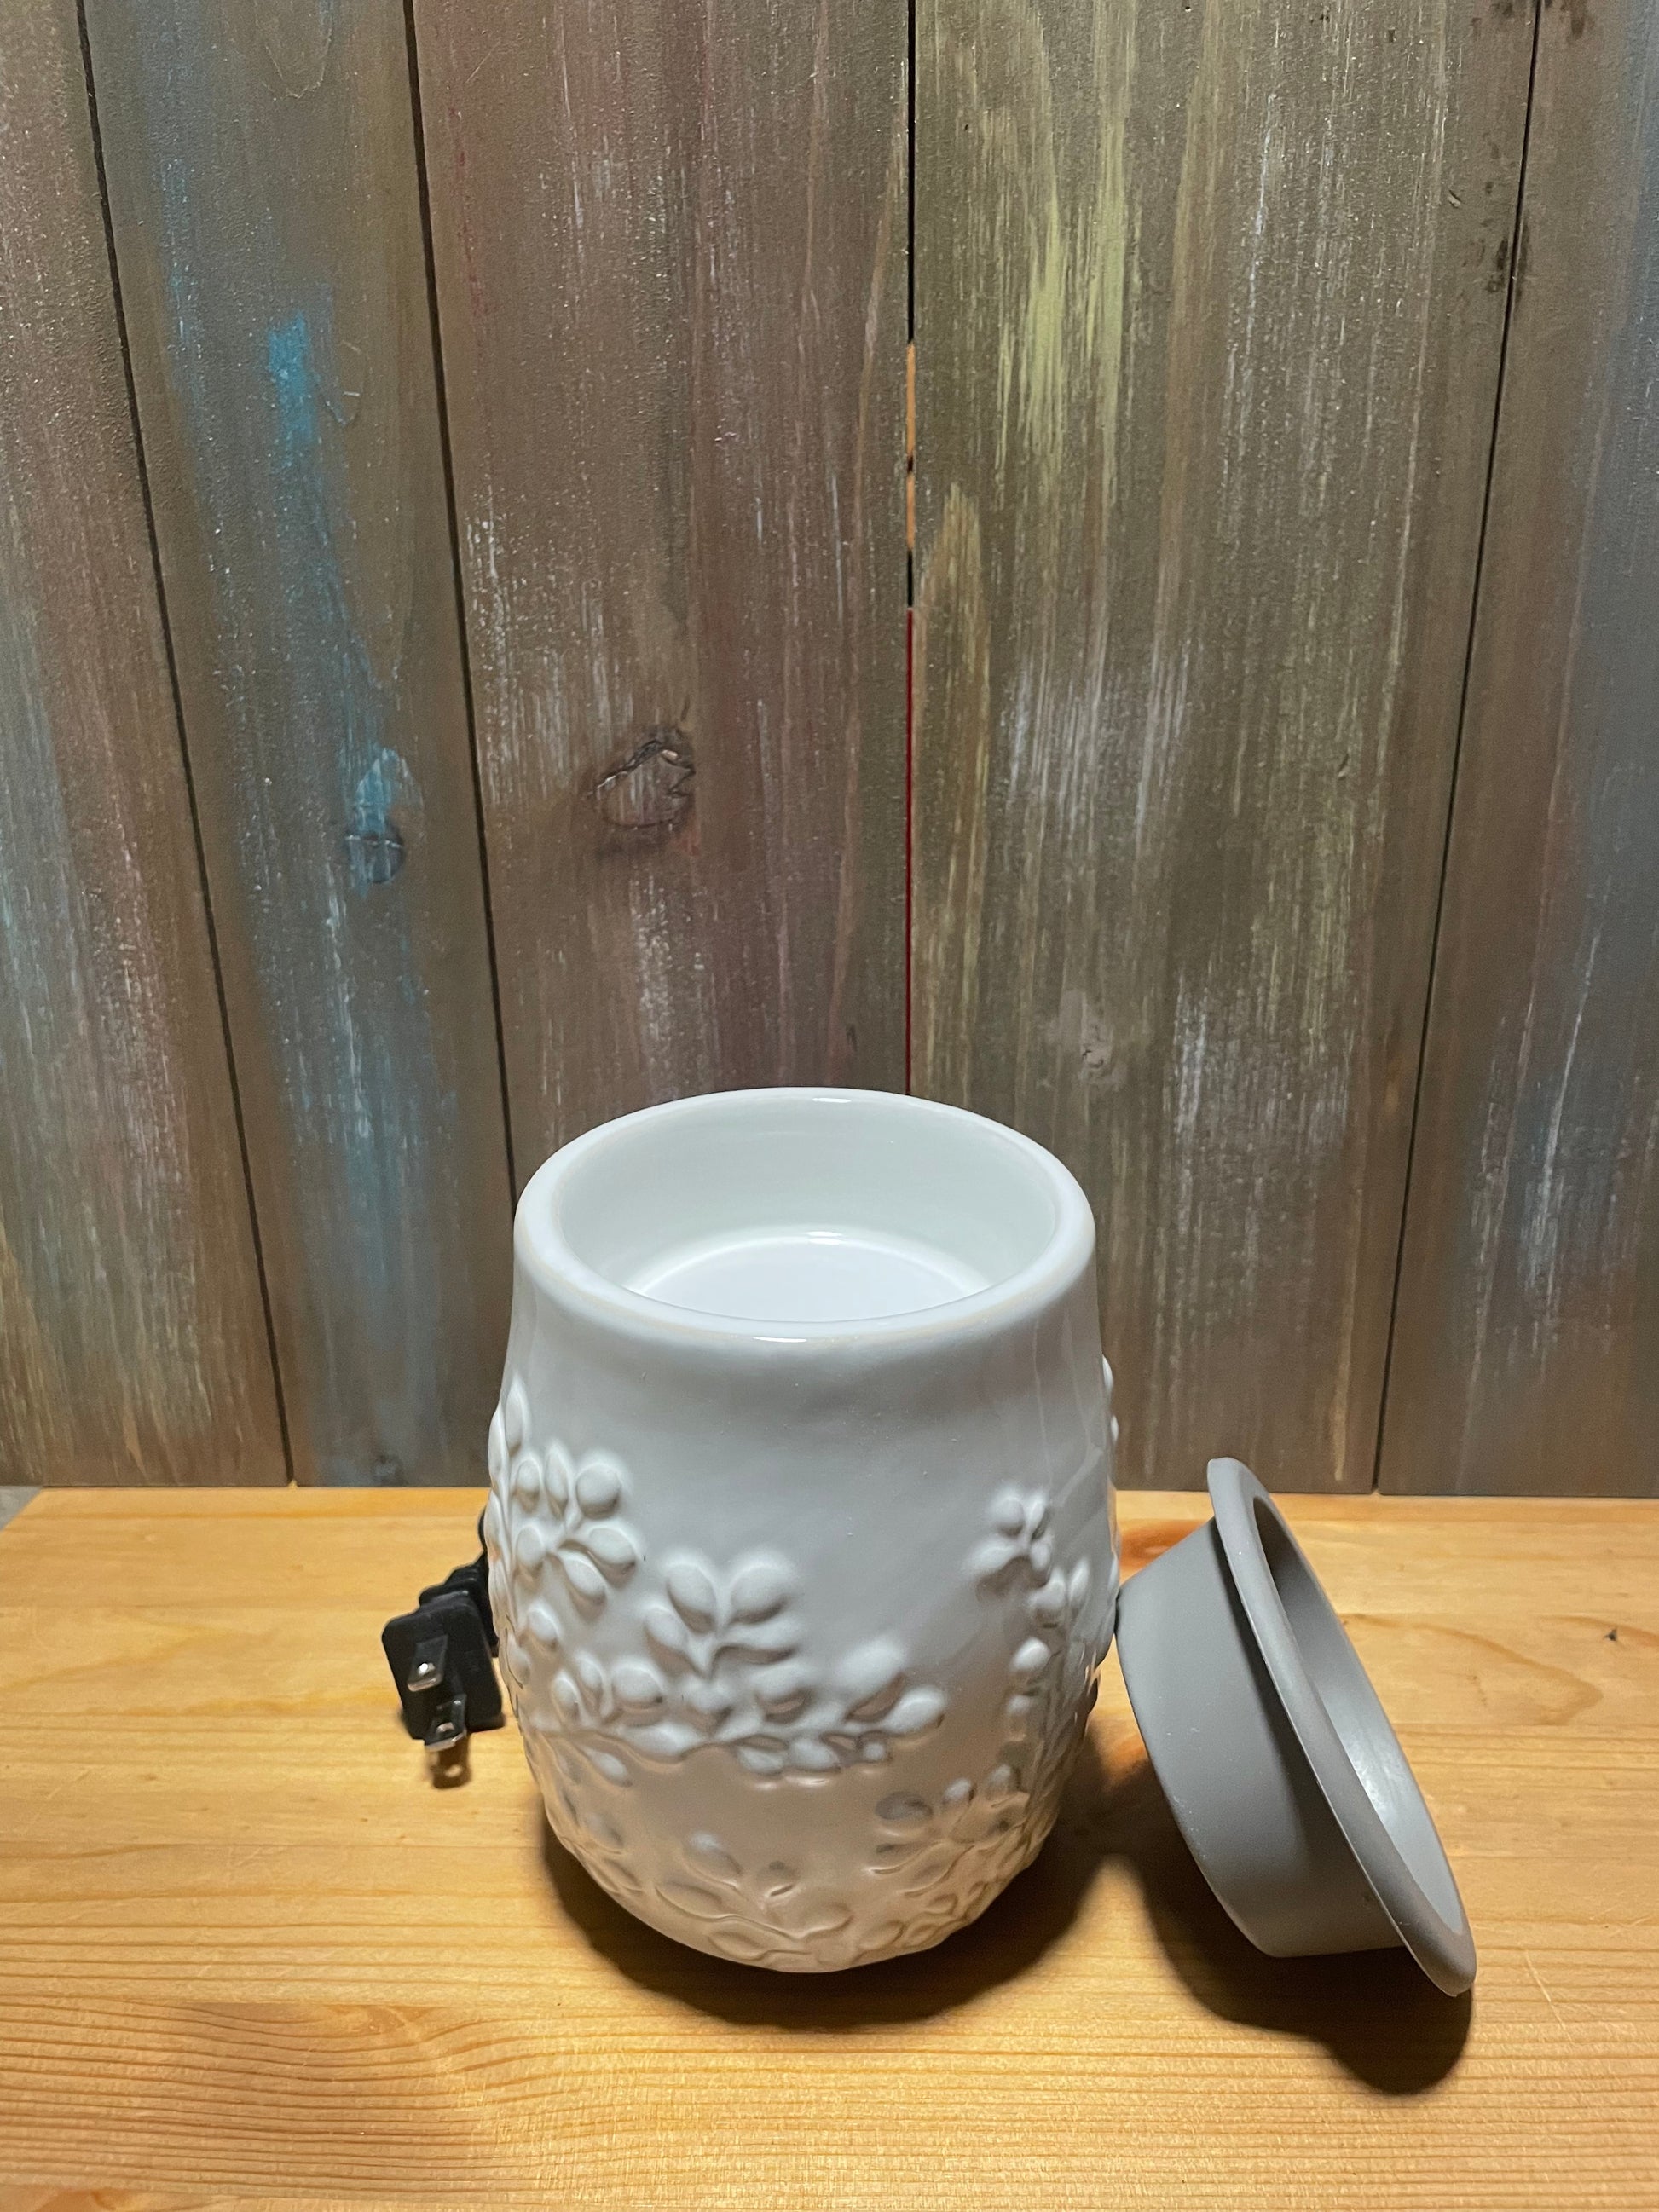 Yankee Candle Electric Wax Cup Warmer Gray and Brown With Wax Melt